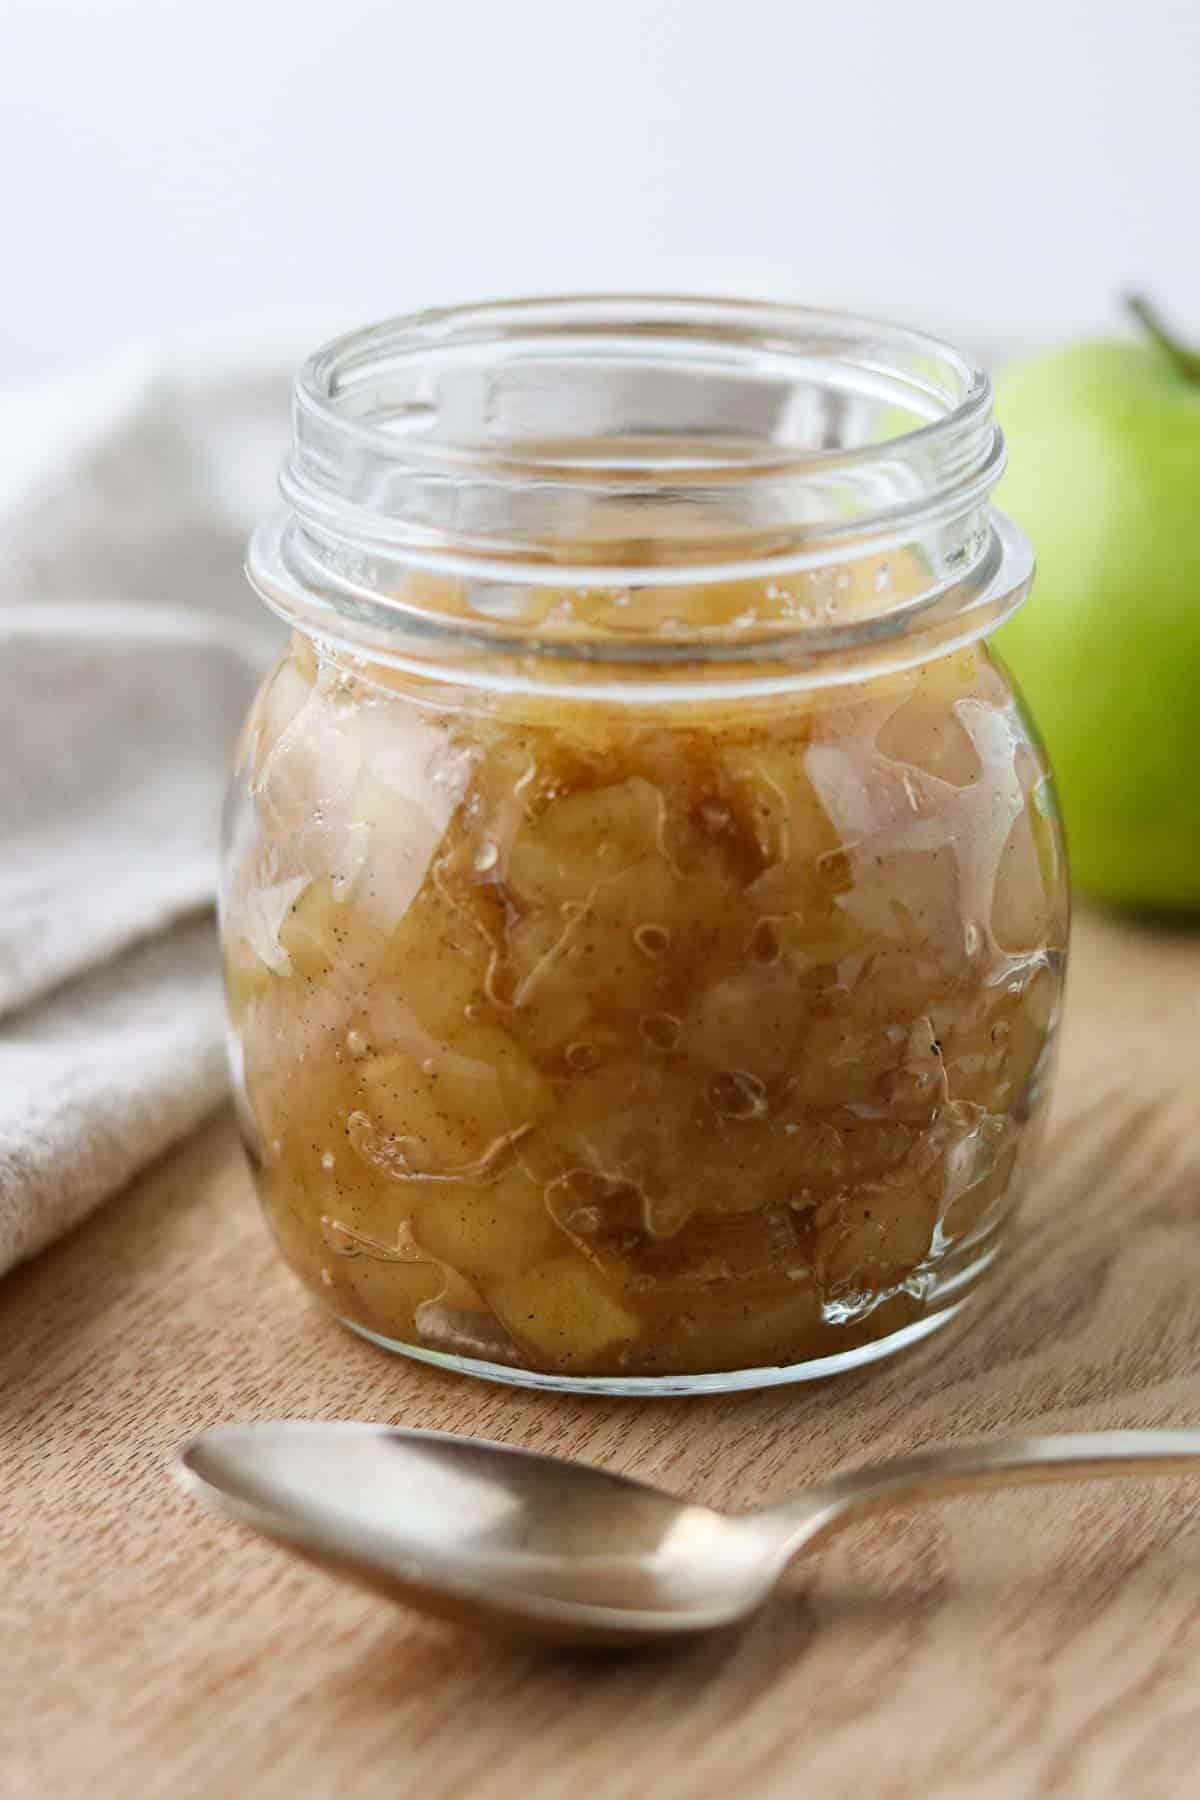 Apple compote in a jar next to a spoon and a green apple.